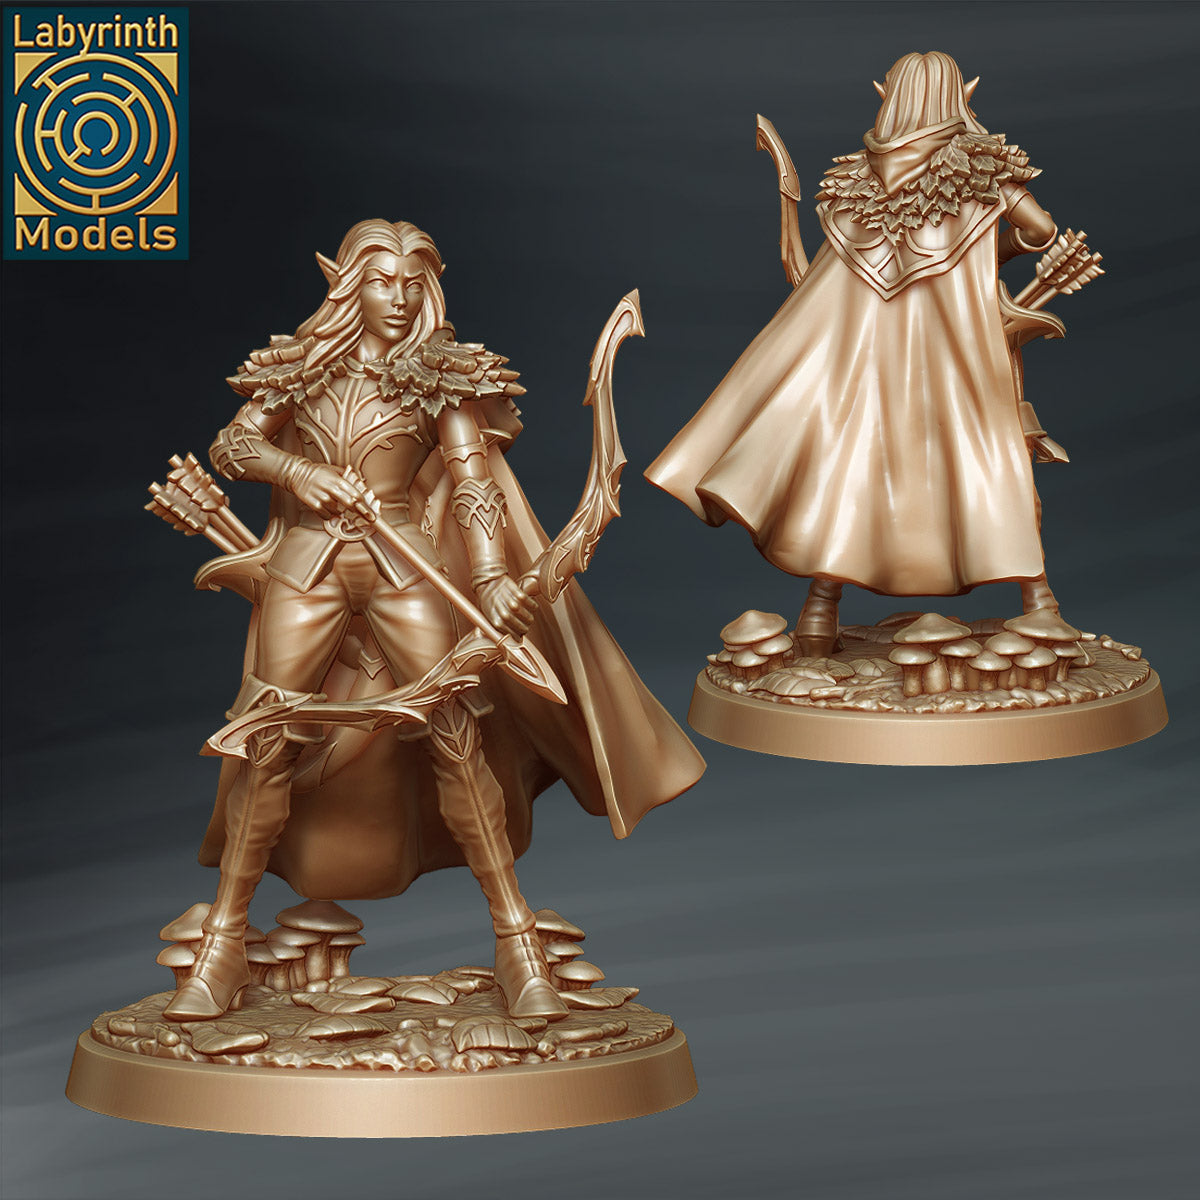 Rangers by Labyrinth Models